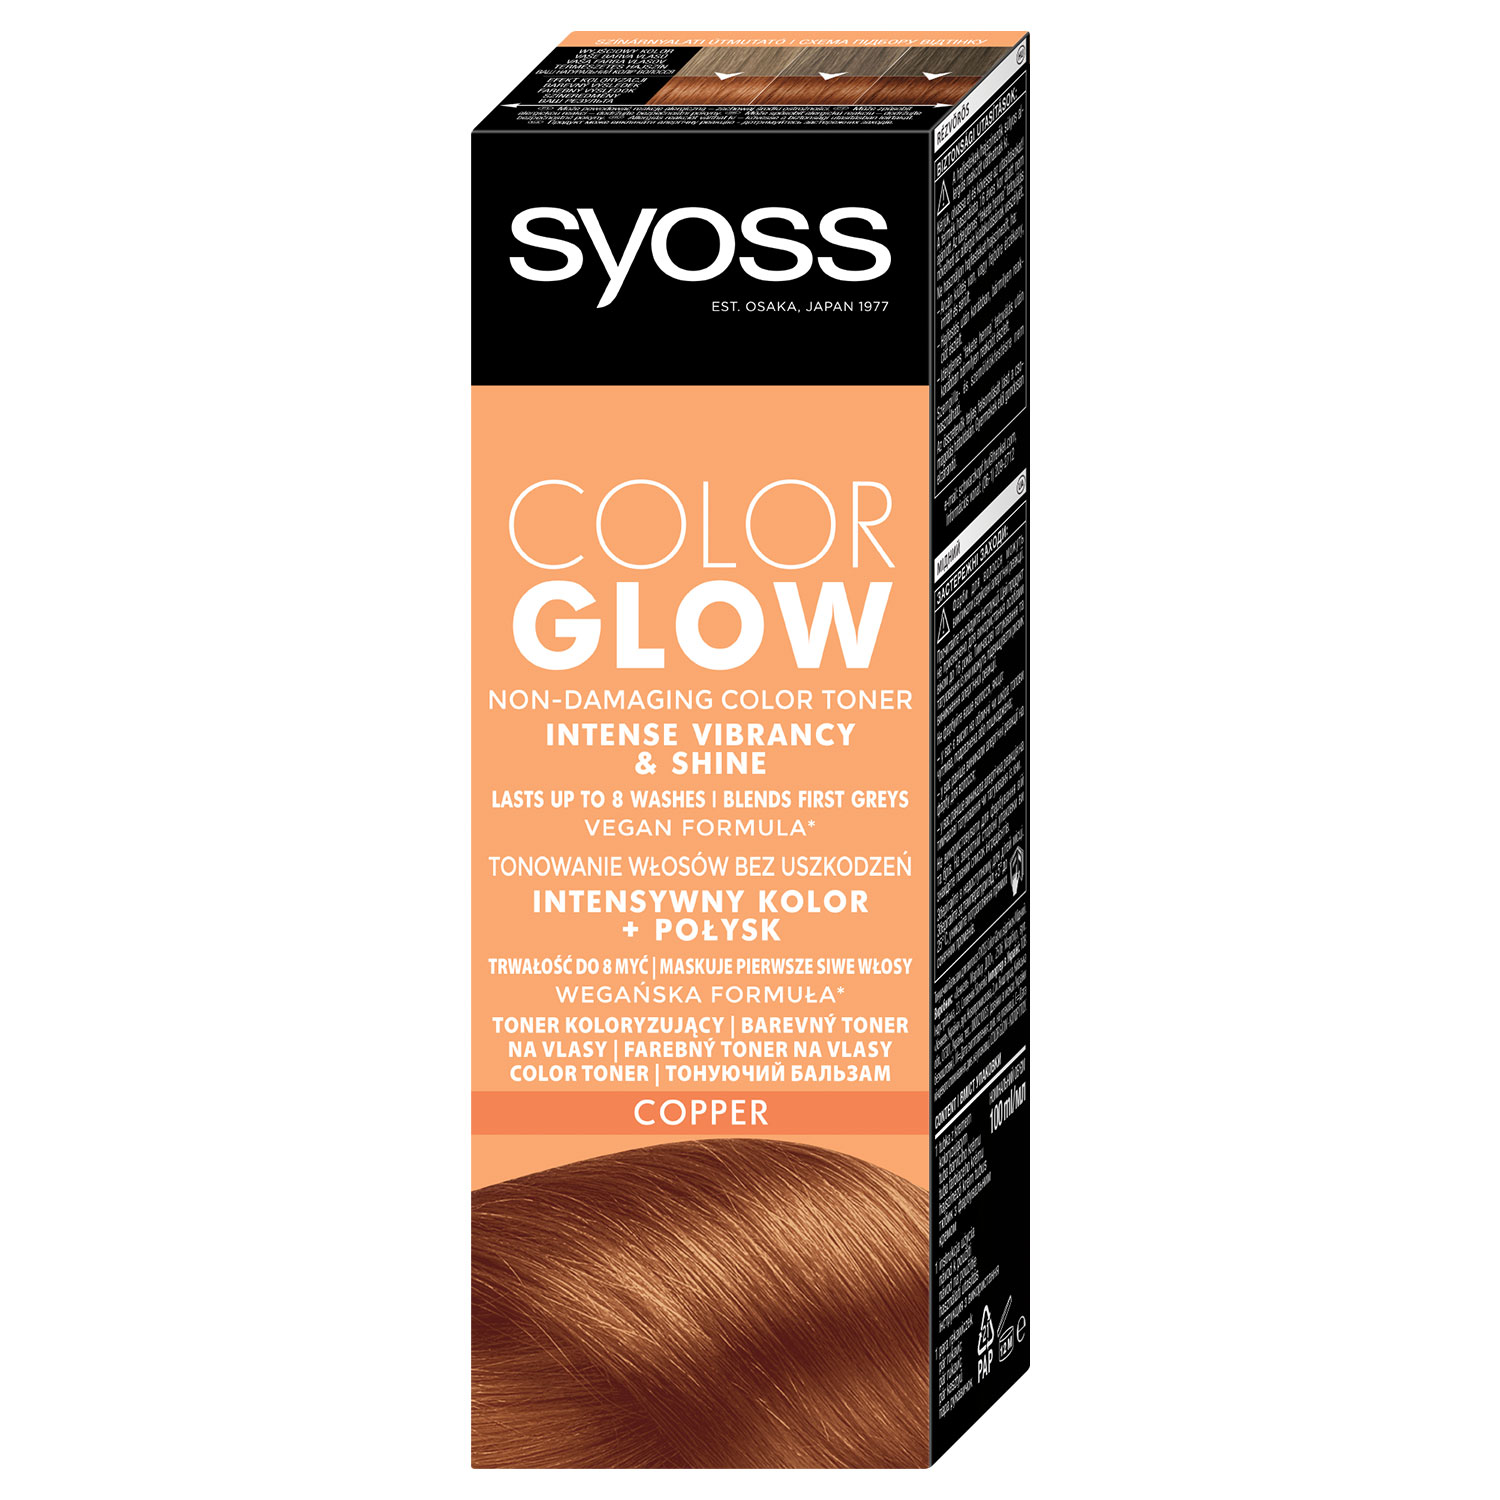 Balm SYOSS Color Glow Copper without ammonia for hair tinting 150ml